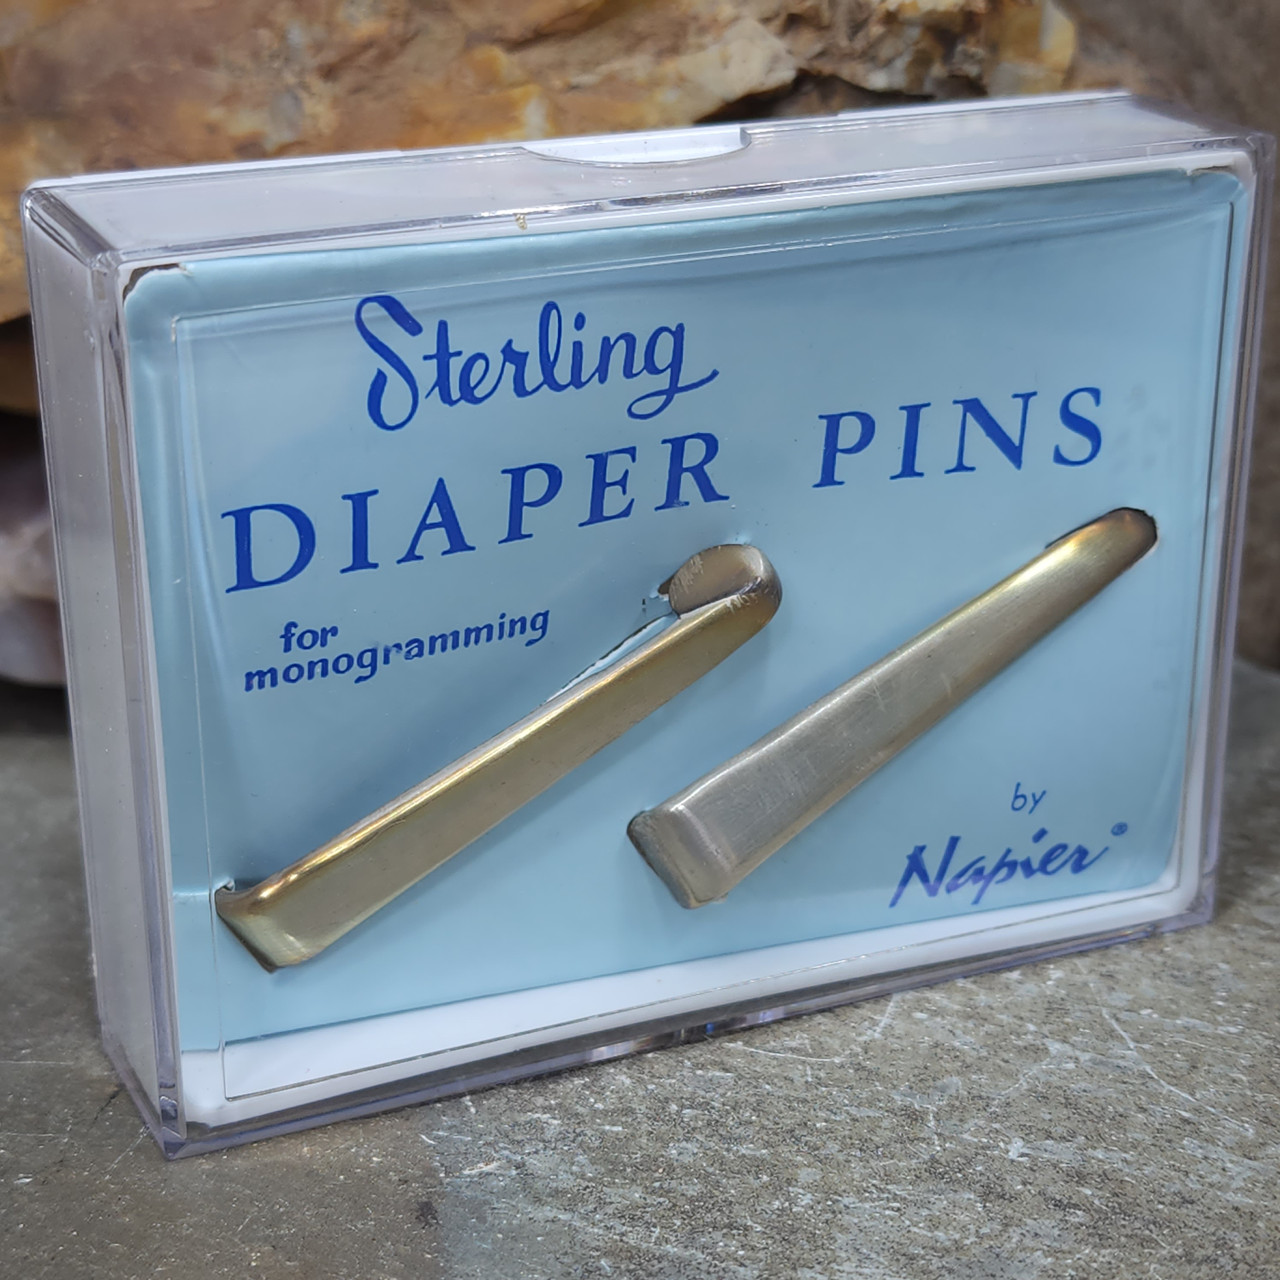 Antique Metal Diaper Pin - antiques - by owner - collectibles sale